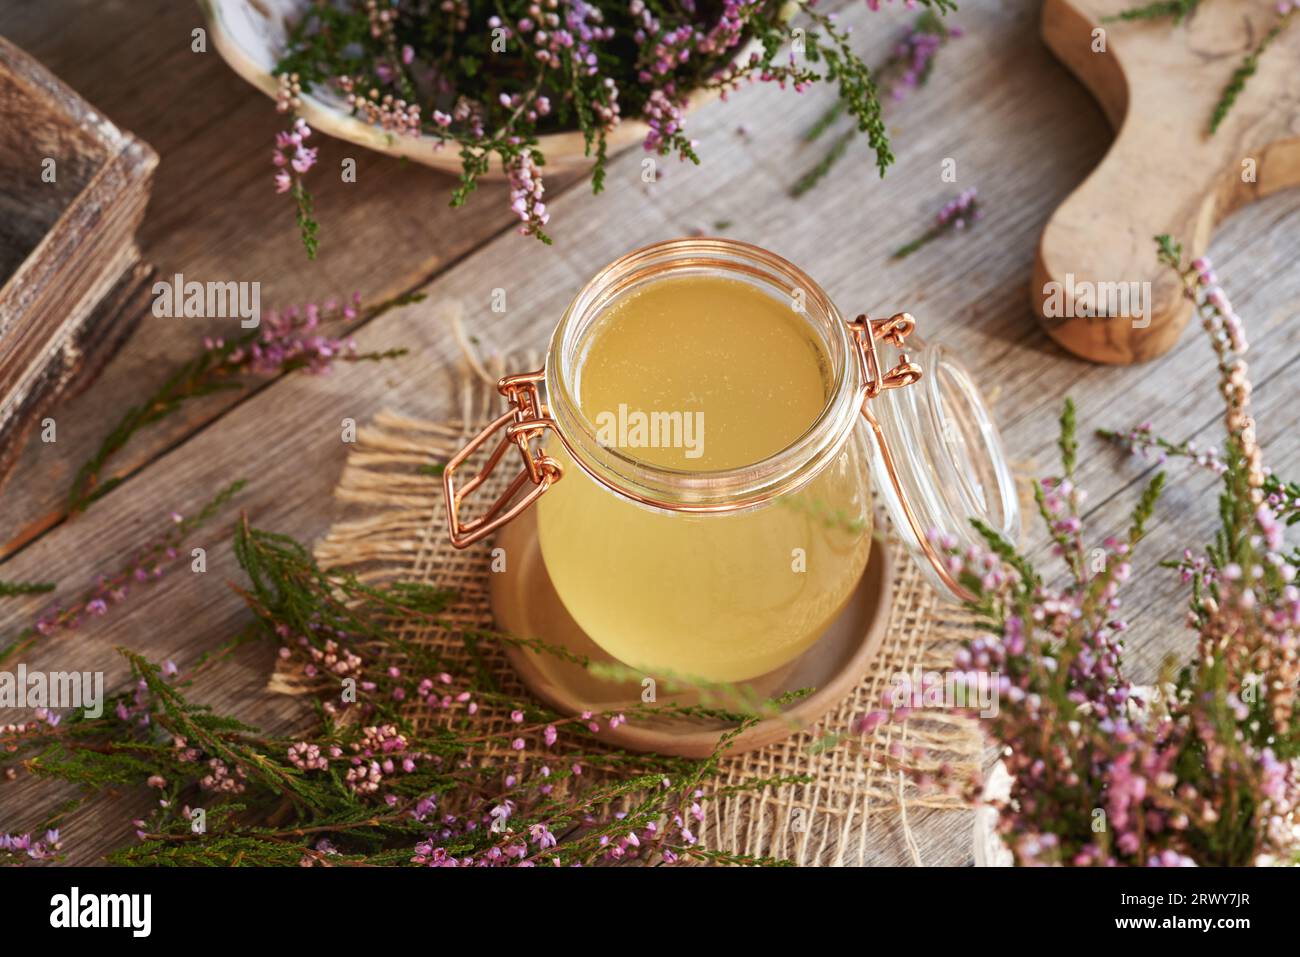 Herbal syrup in a glass jar with fresh wild heather flowers harvested in the forest Stock Photo